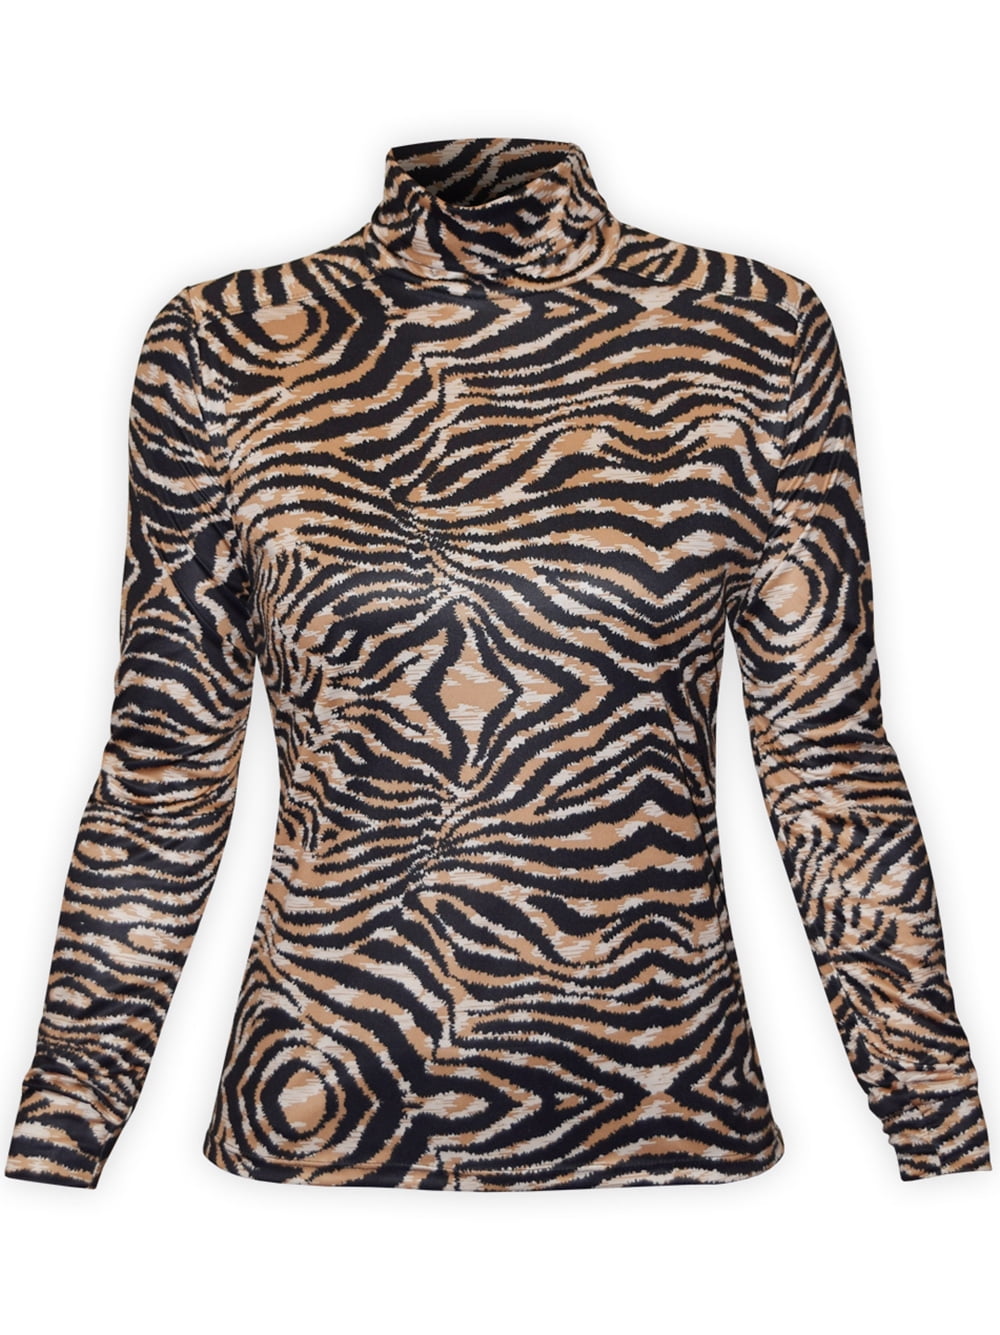 HOT CHILLYS - Hot Chillys Women's Peachskins Print Turtleneck, Tiger ...